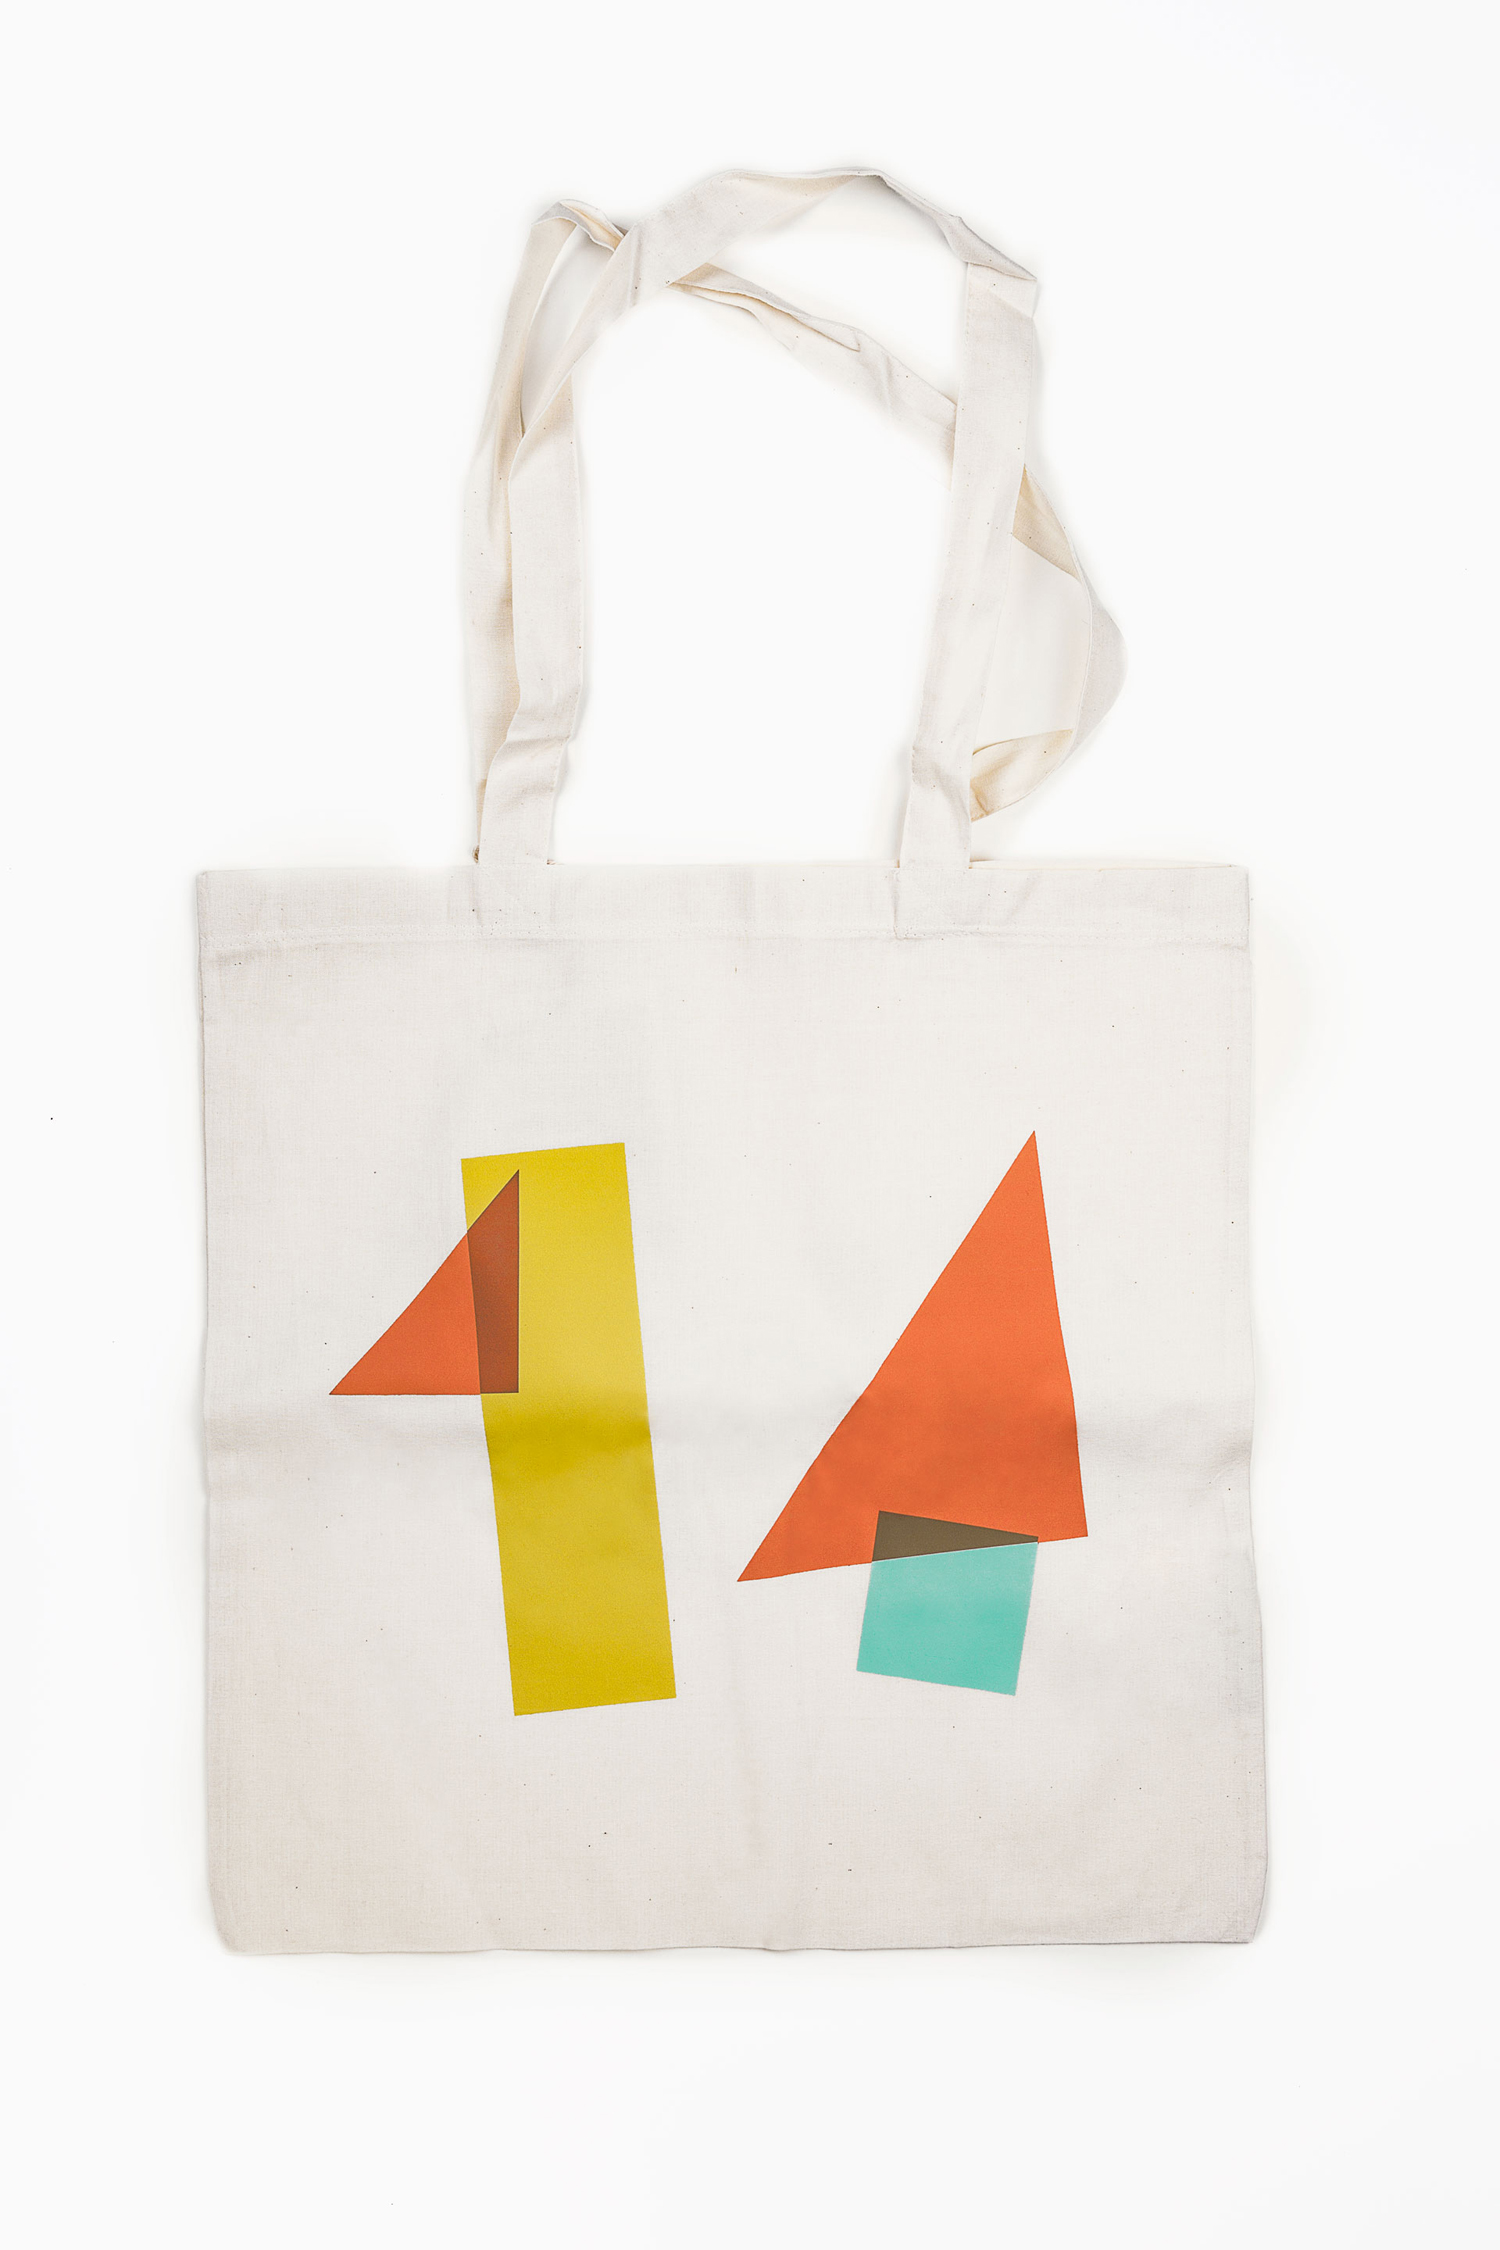 Logo and branded tote bag designed by Bedow for Swedish creative development studio 14islands